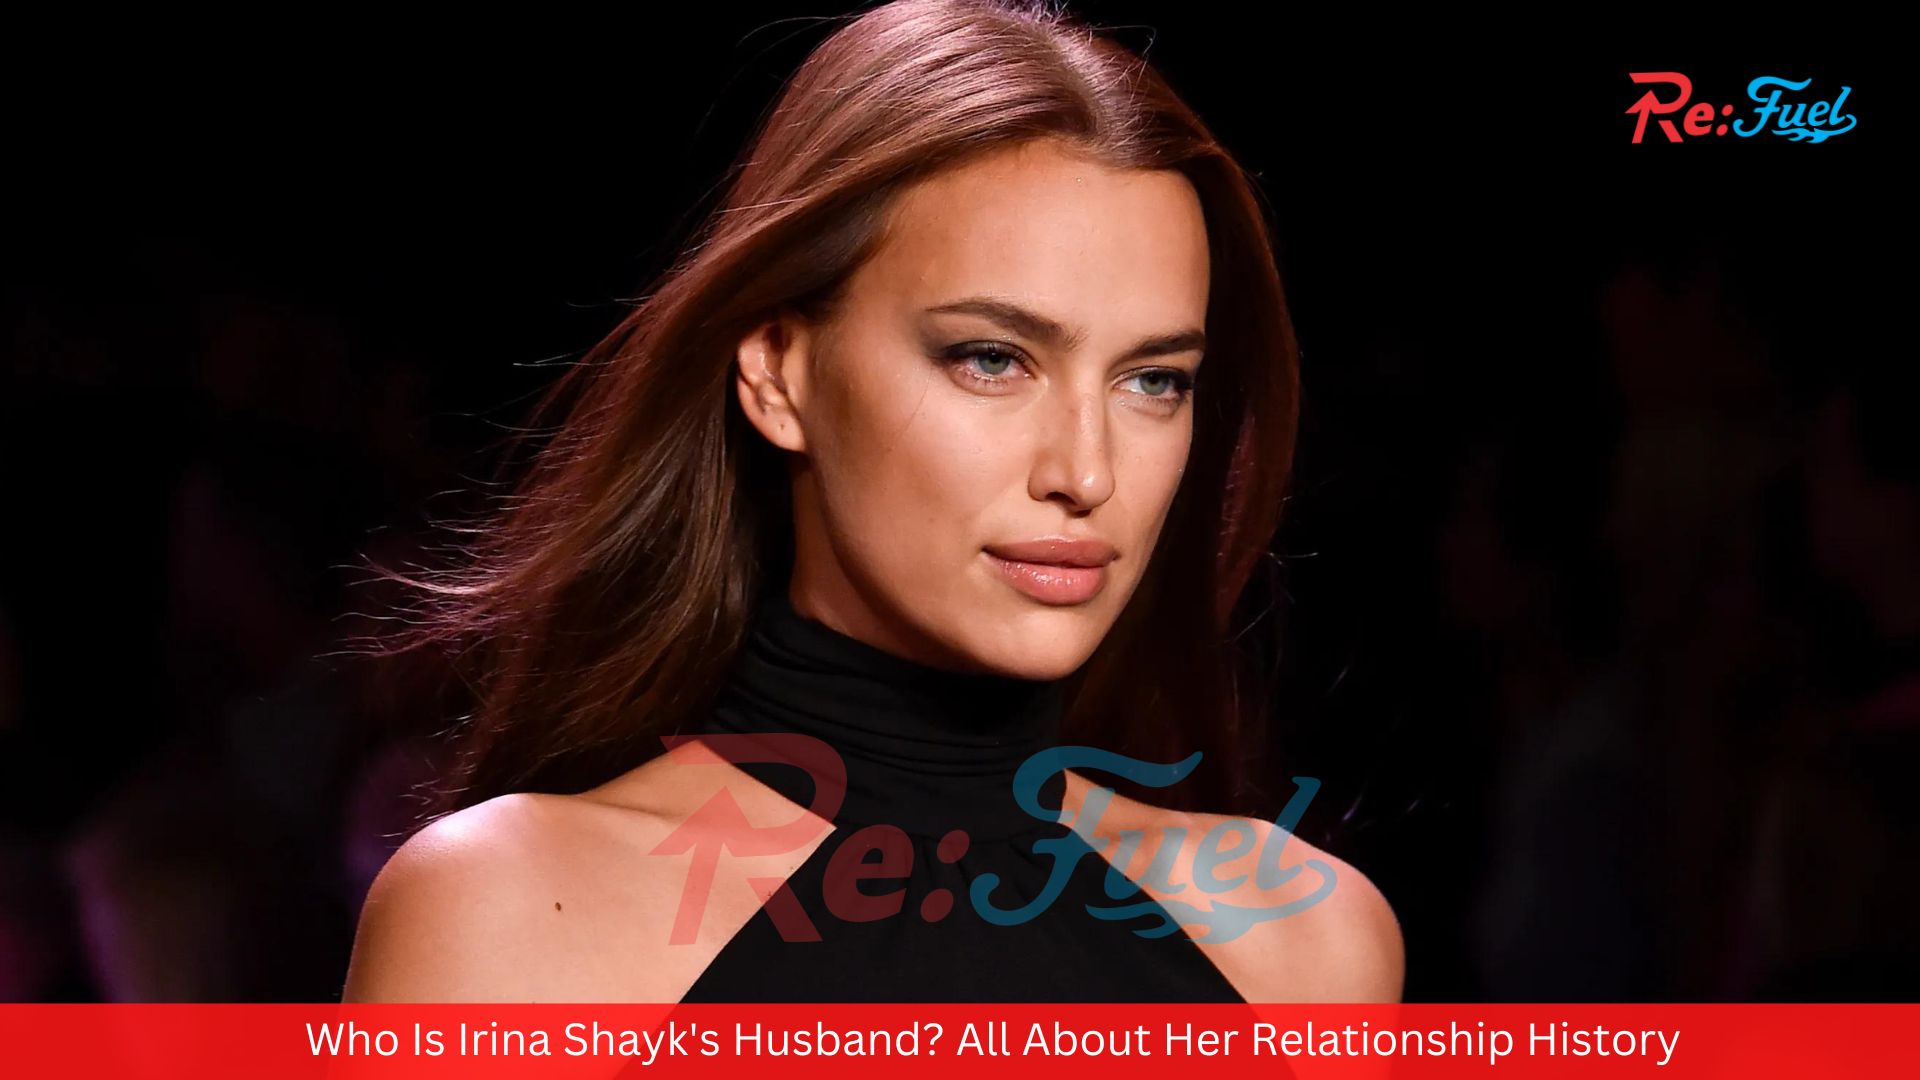 Who Is Irina Shayk's Husband? All About Her Relationship History